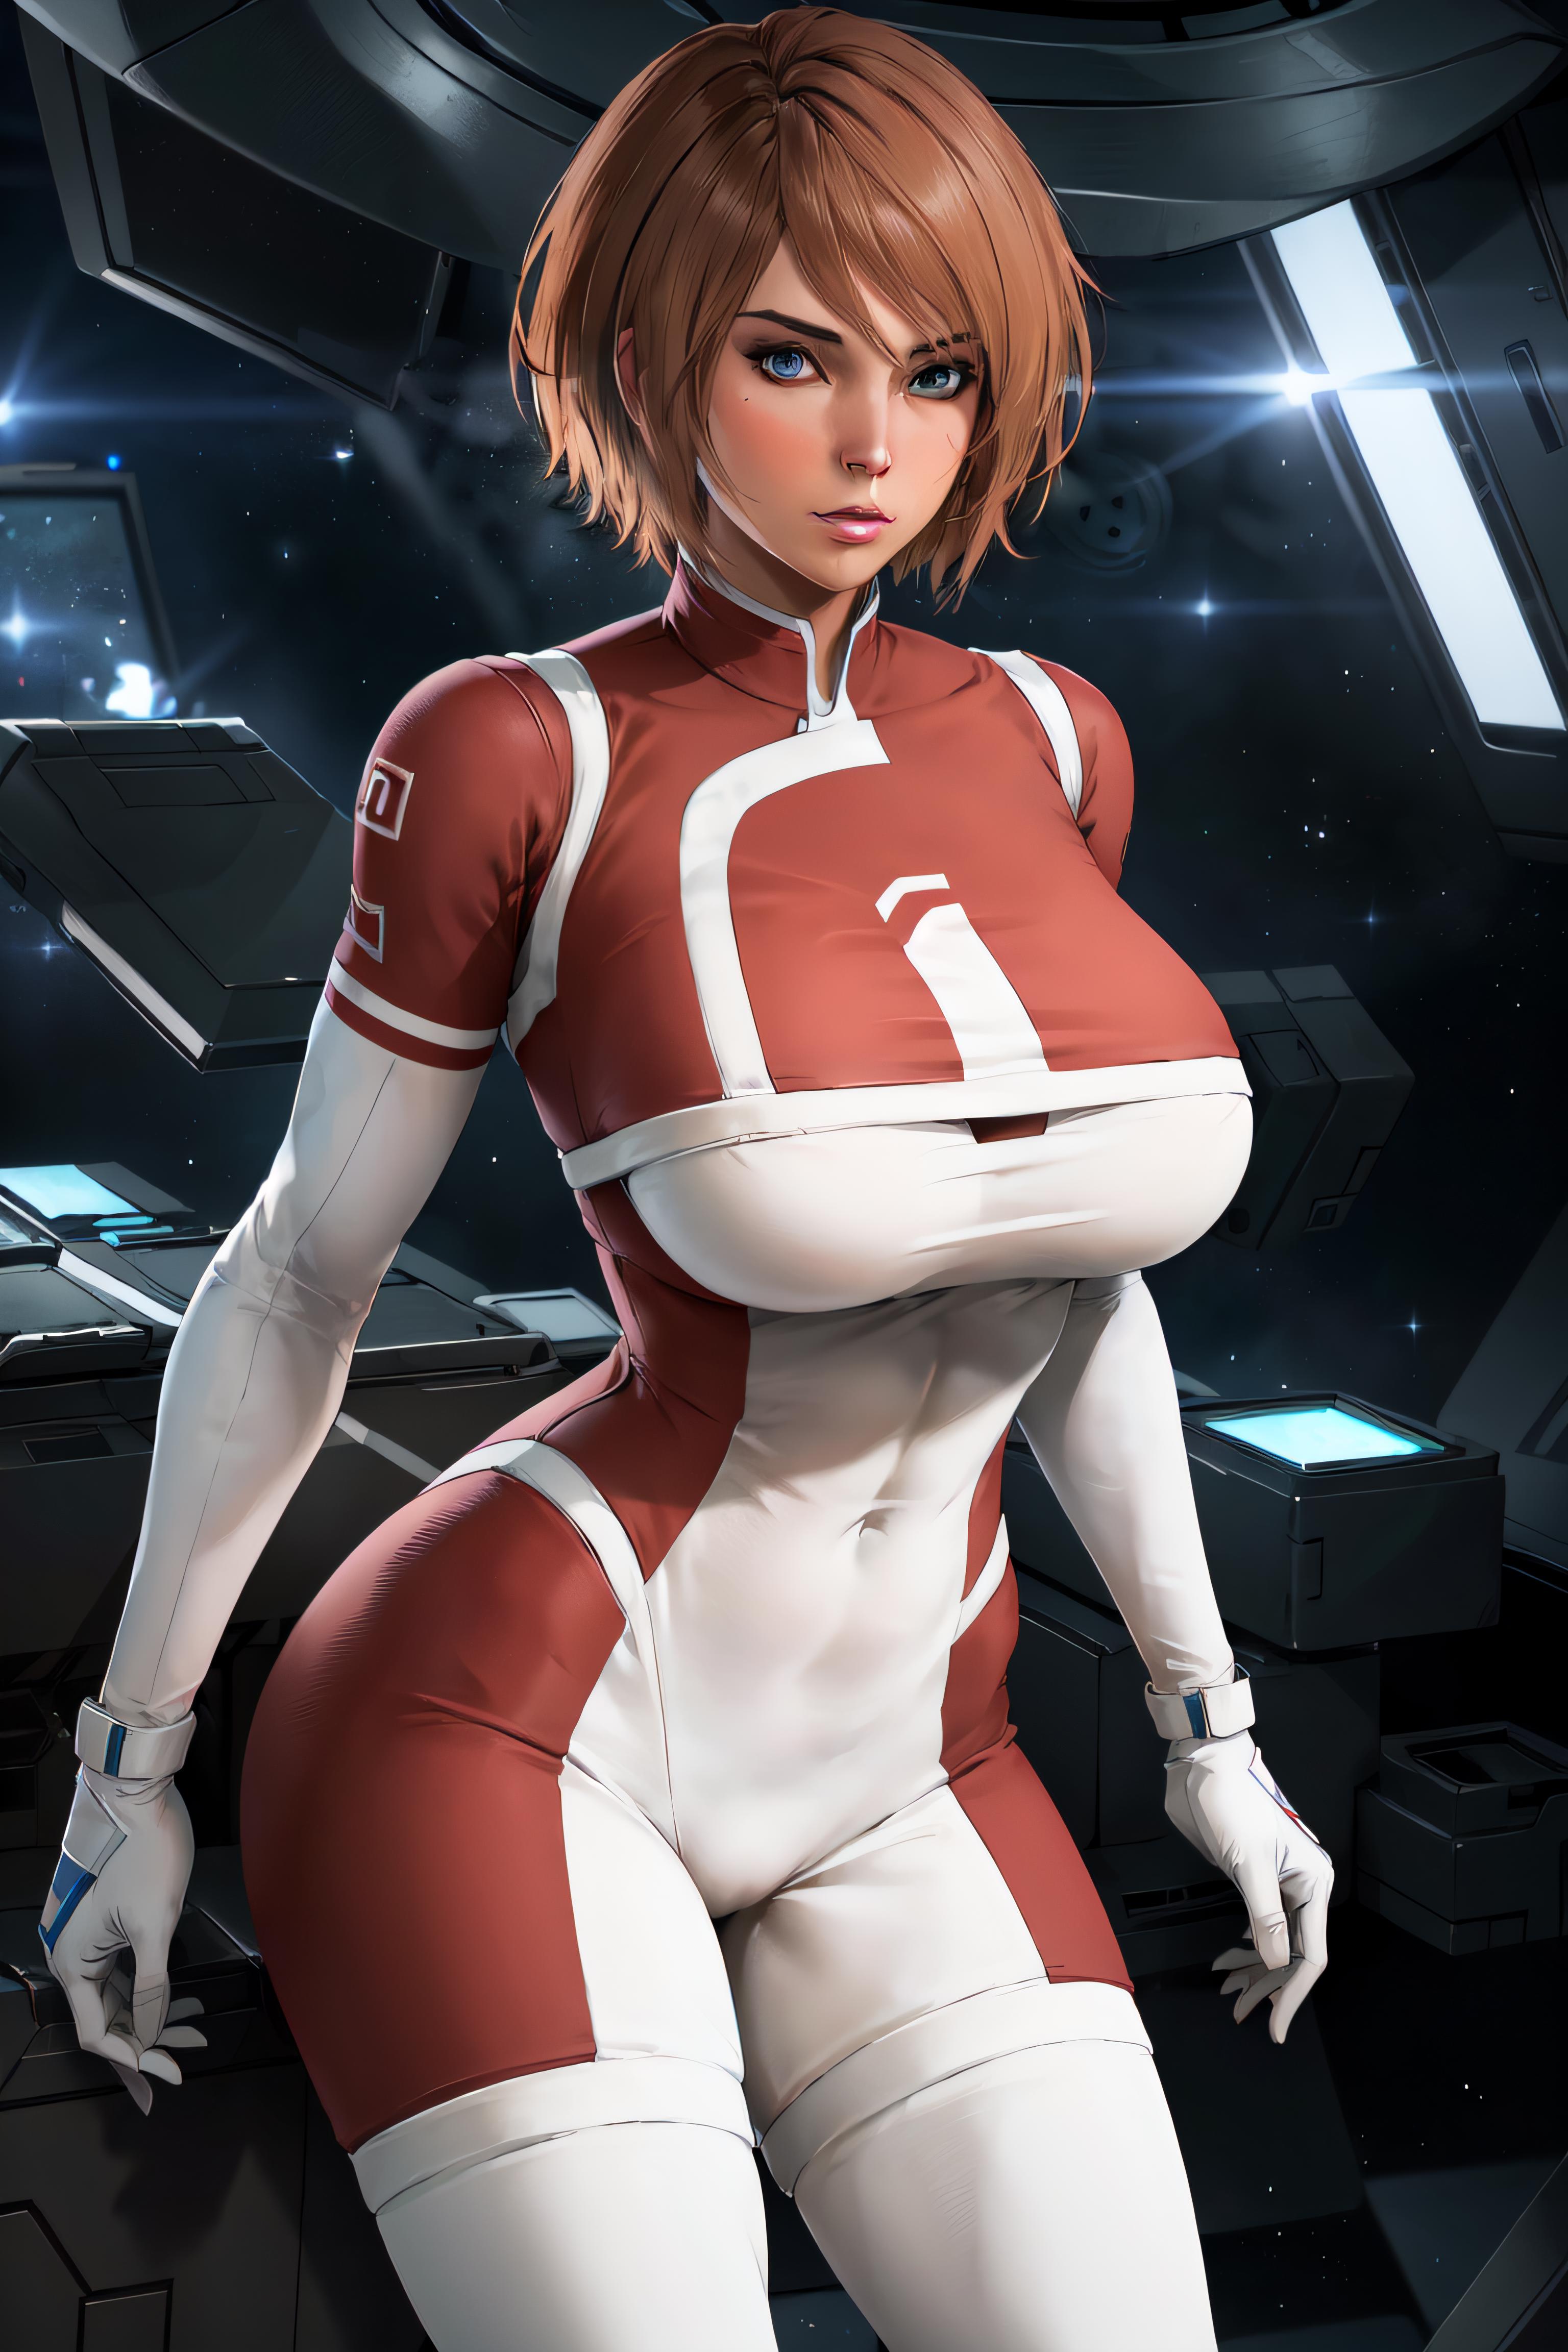 Suvi from Mass Effect: Andromeda image by betweenspectrums